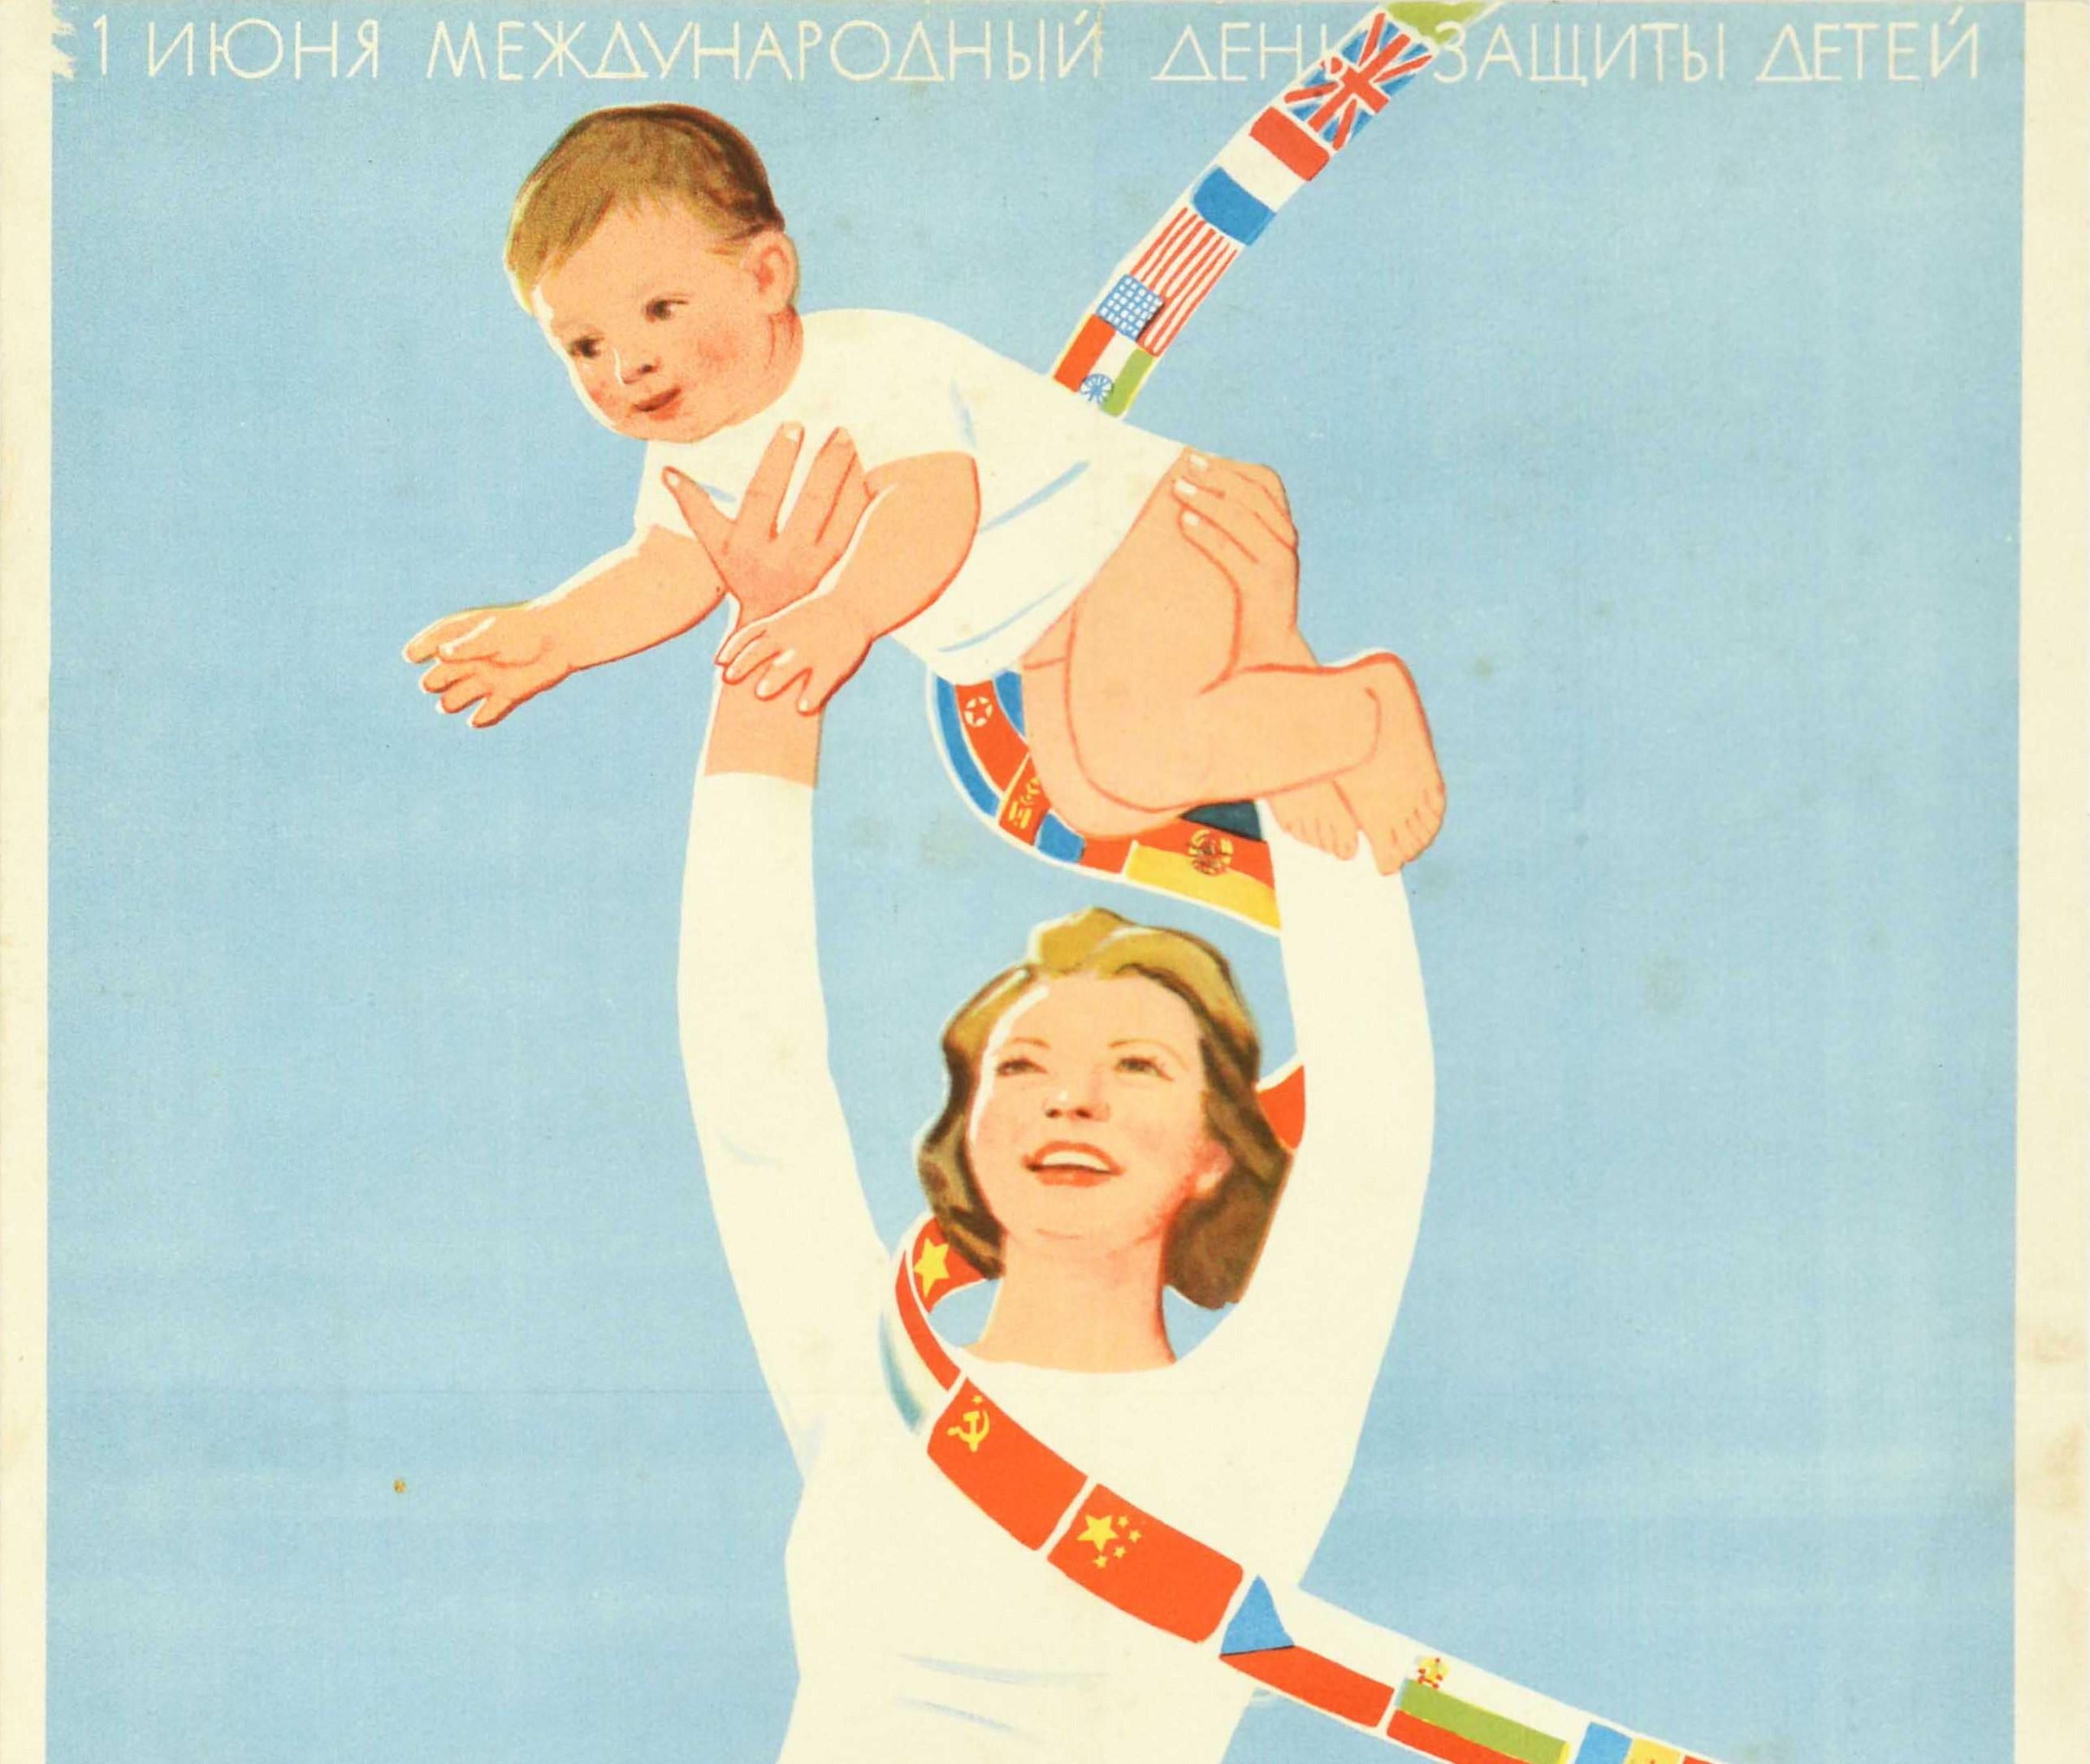 Original vintage Soviet propaganda poster - 1 June International Children's Day For Life For Happiness! - featuring a smiling mother and child against a pale blue background, the lady holding up a baby with a ribbon of flags from different countries